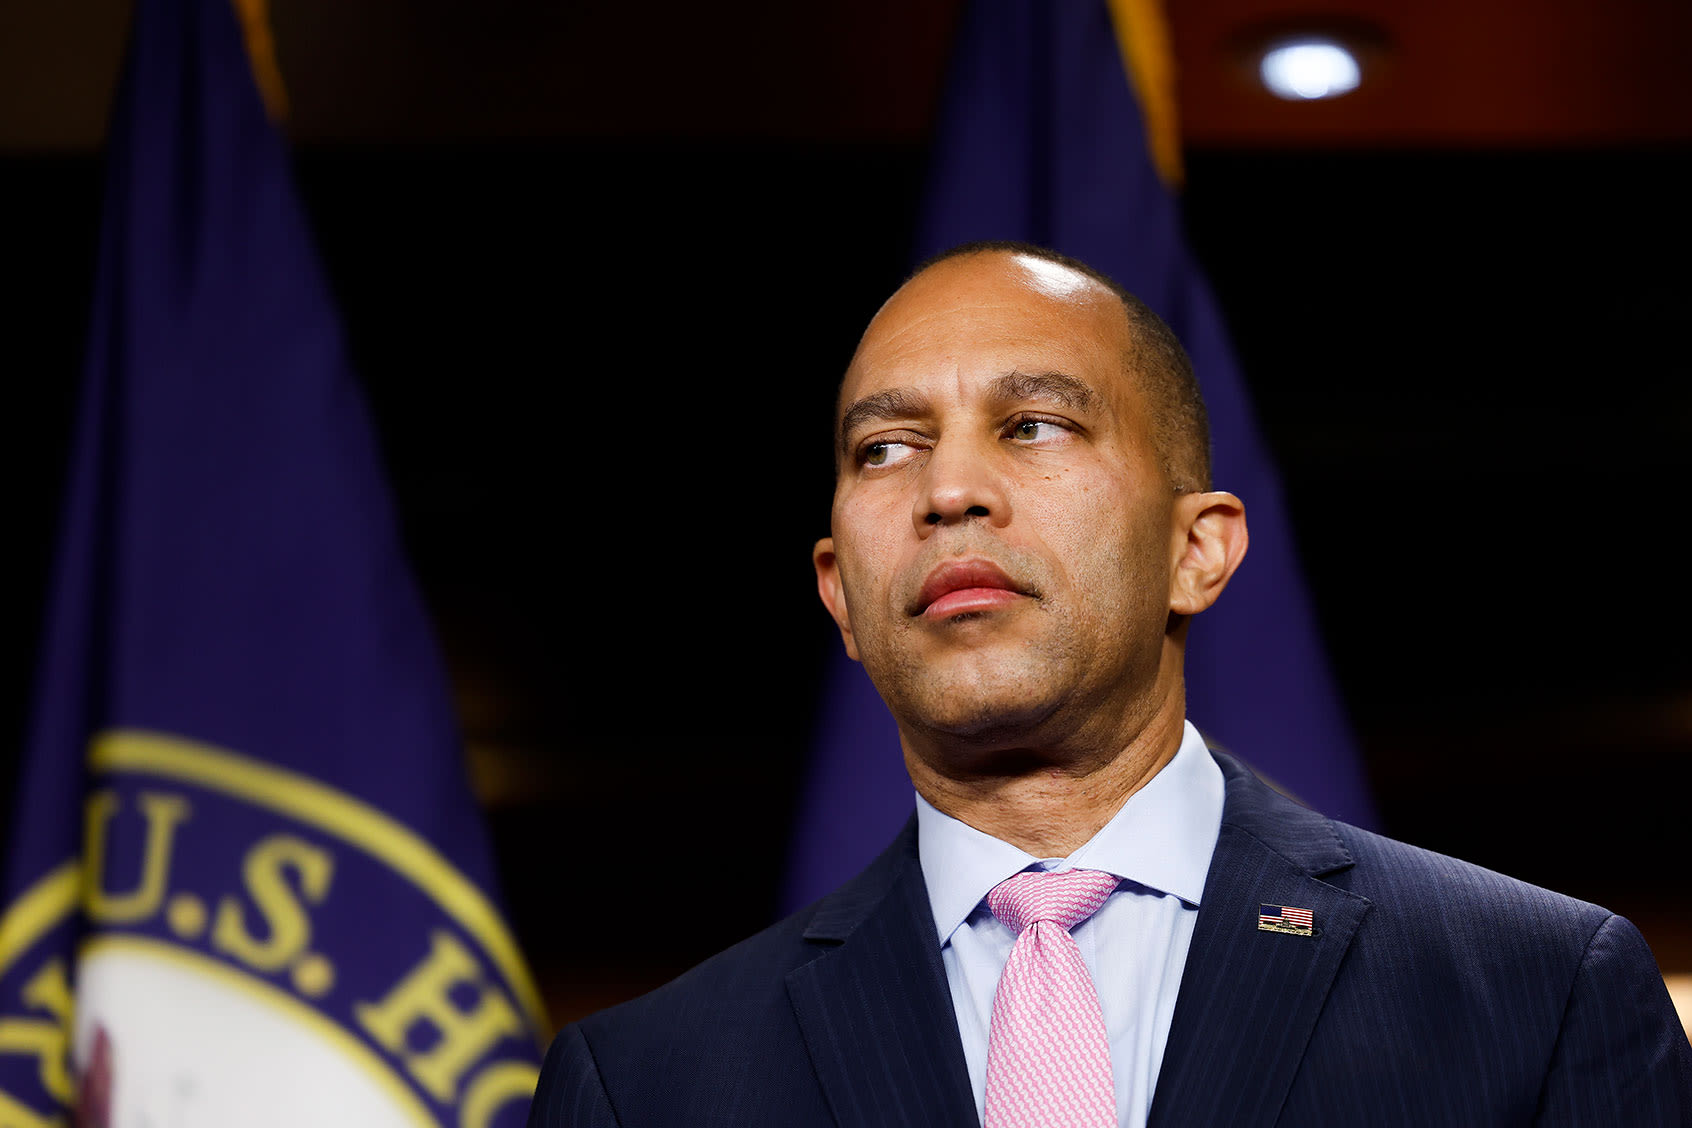 "A ticket we can win on": Jeffries backs Biden despite private urges to quit